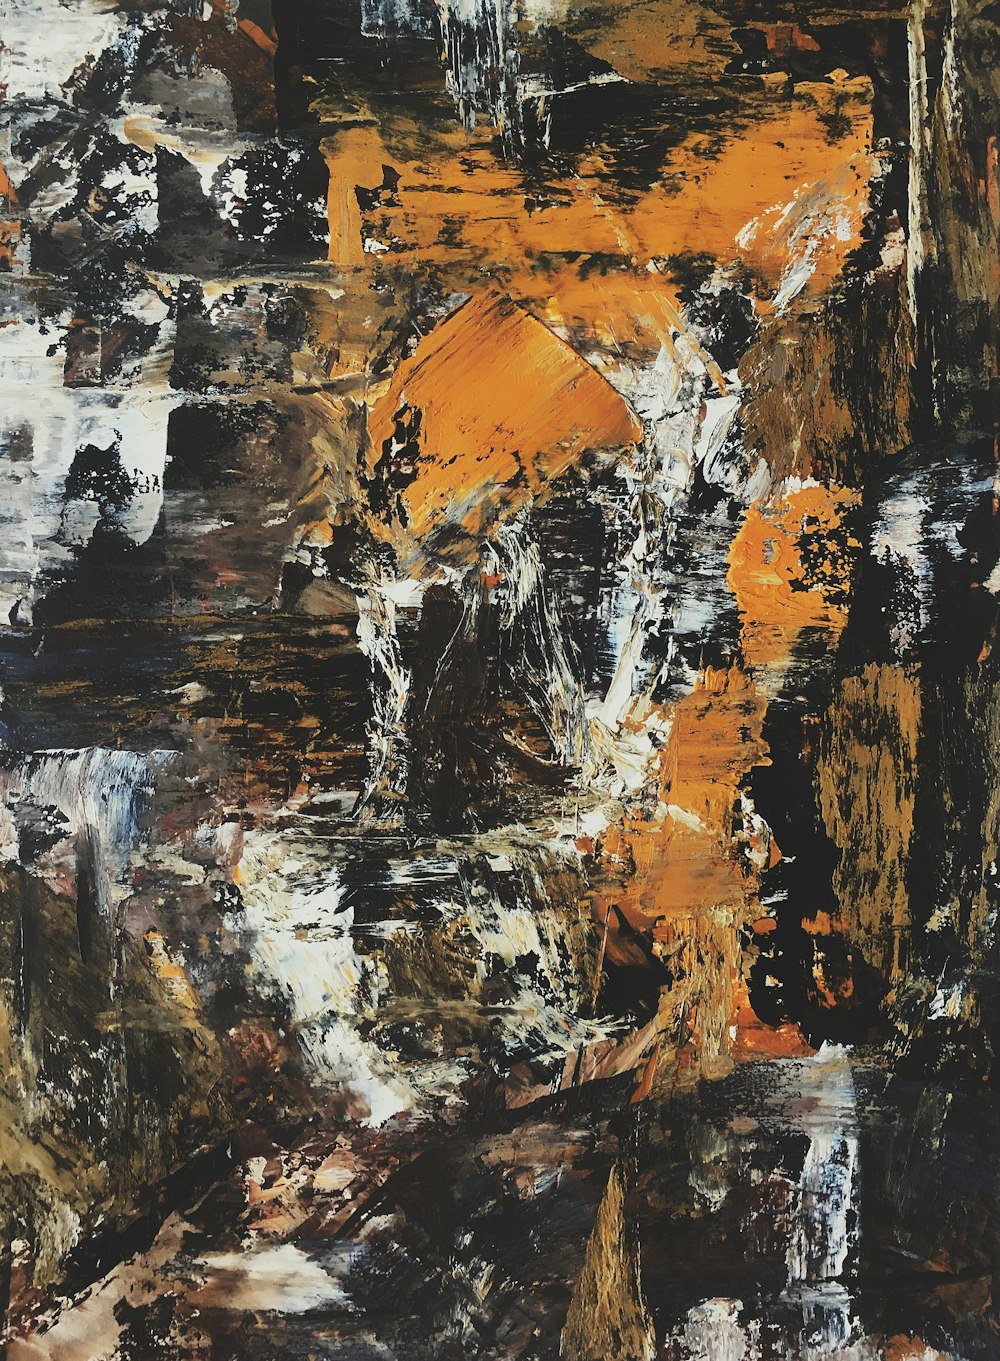 an abstract painting with orange and black colors